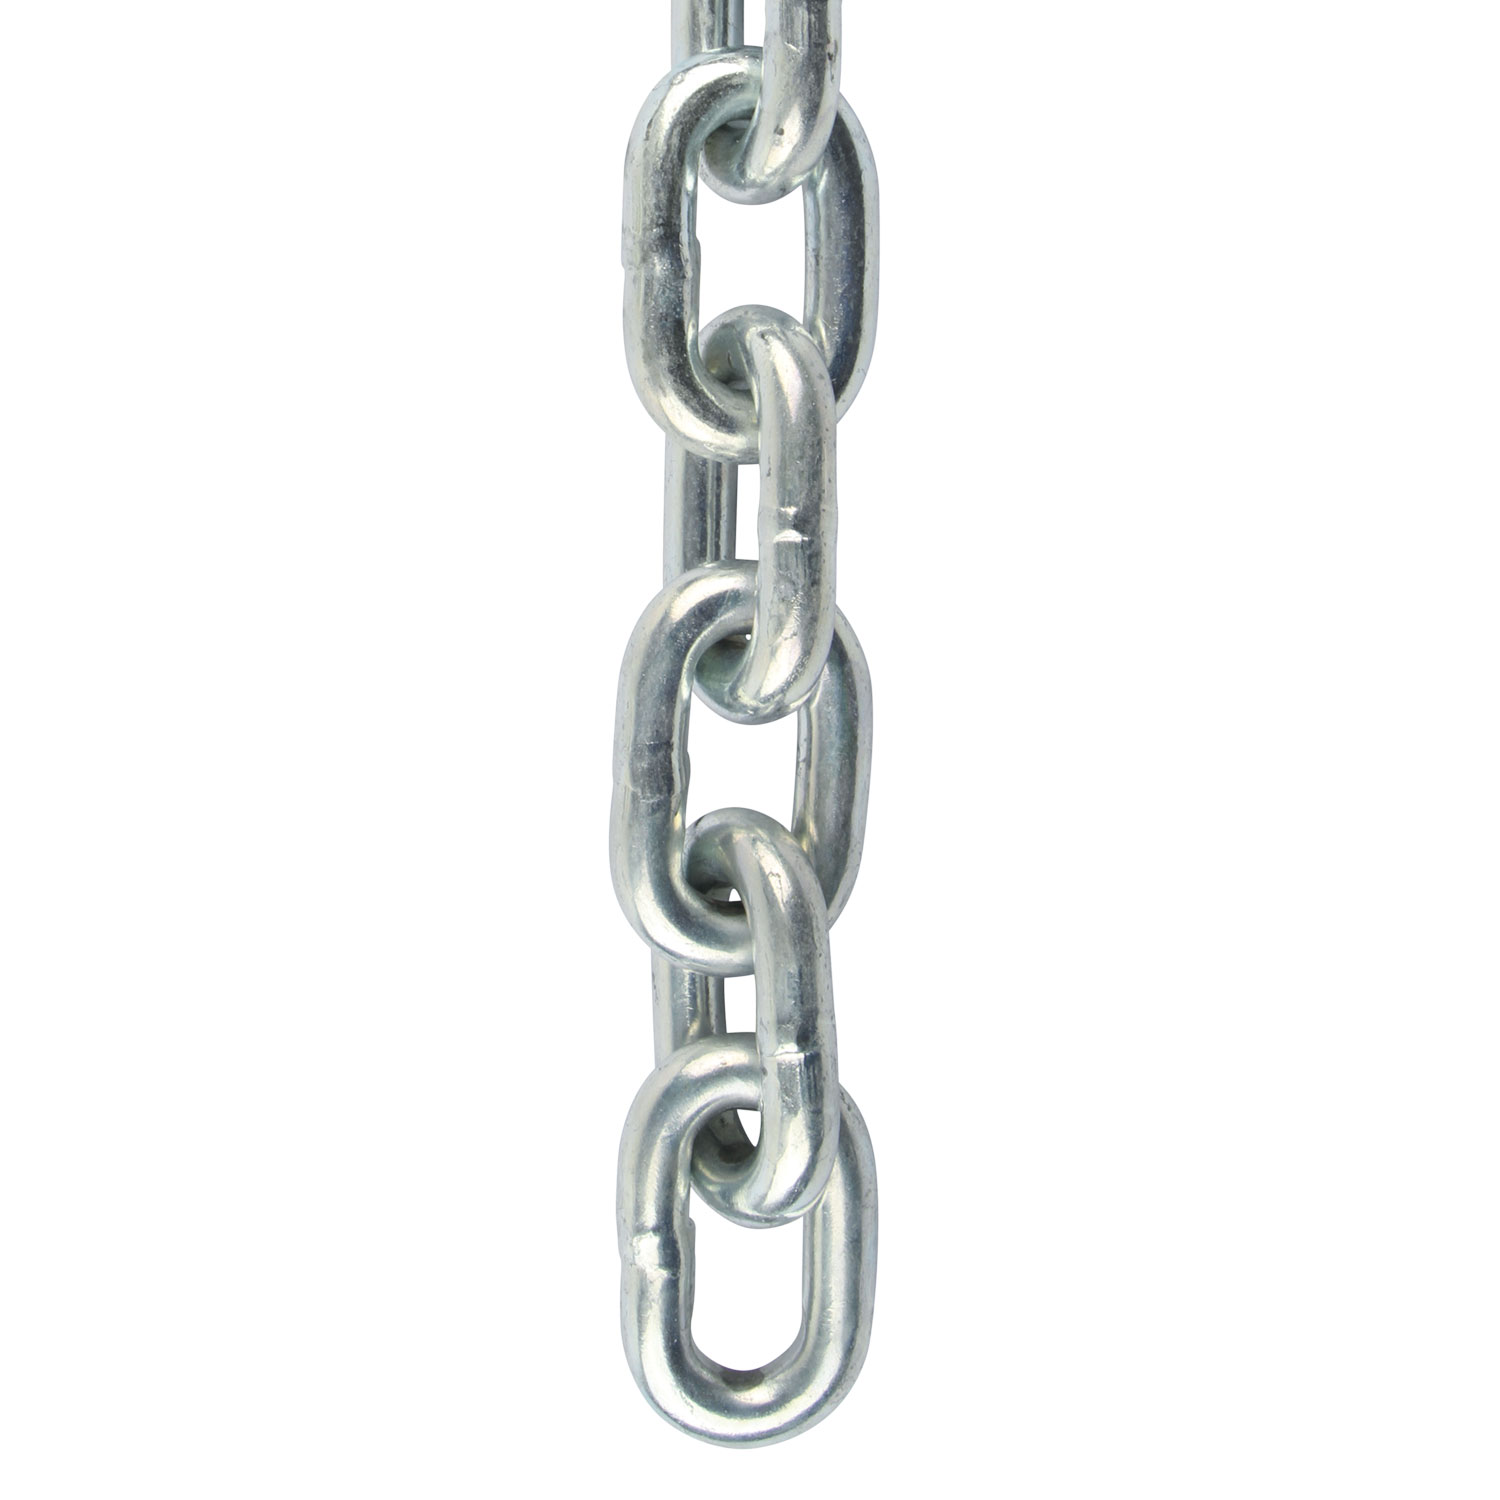 STRONG 7mm HEAVY DUTY PROOF COIL SIDE WELDED SECURITY CHAIN ZINC PLATED BZP 